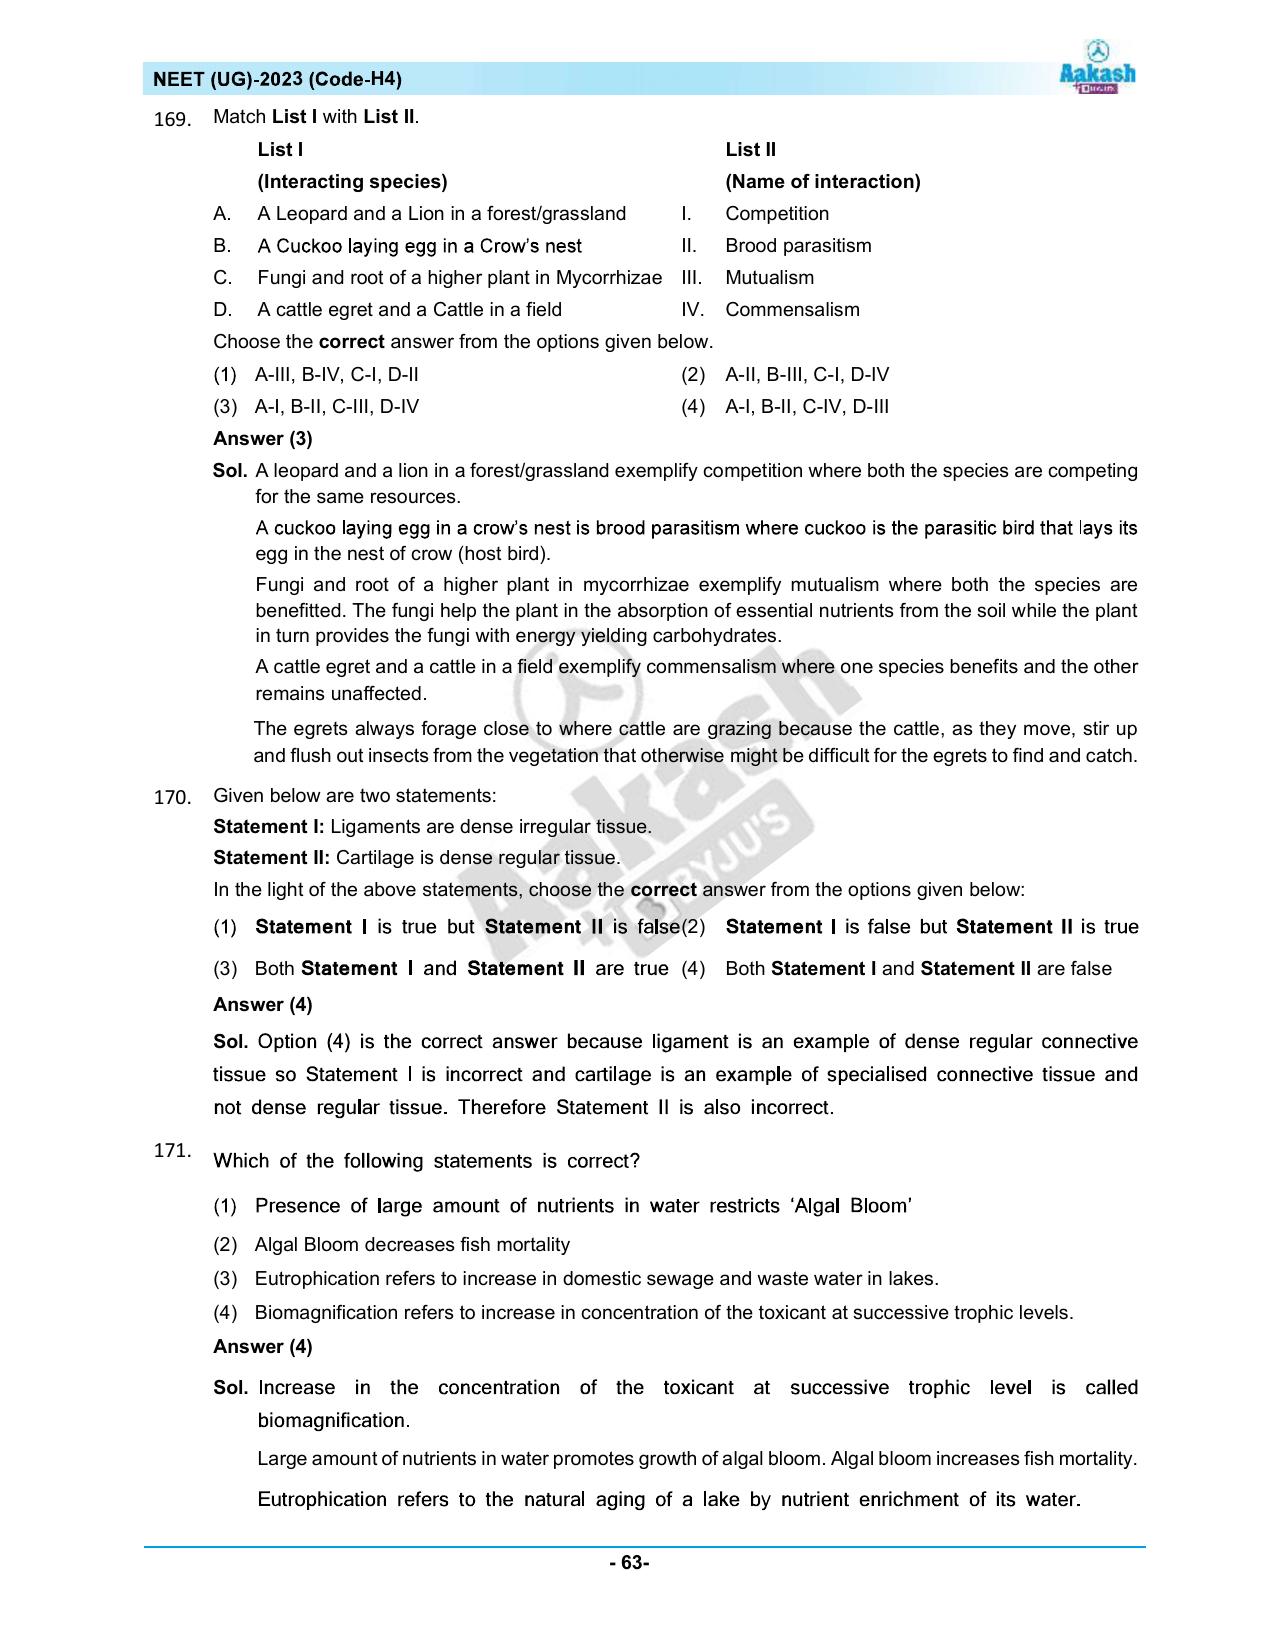 NEET 2023 Question Paper H4 - Page 63